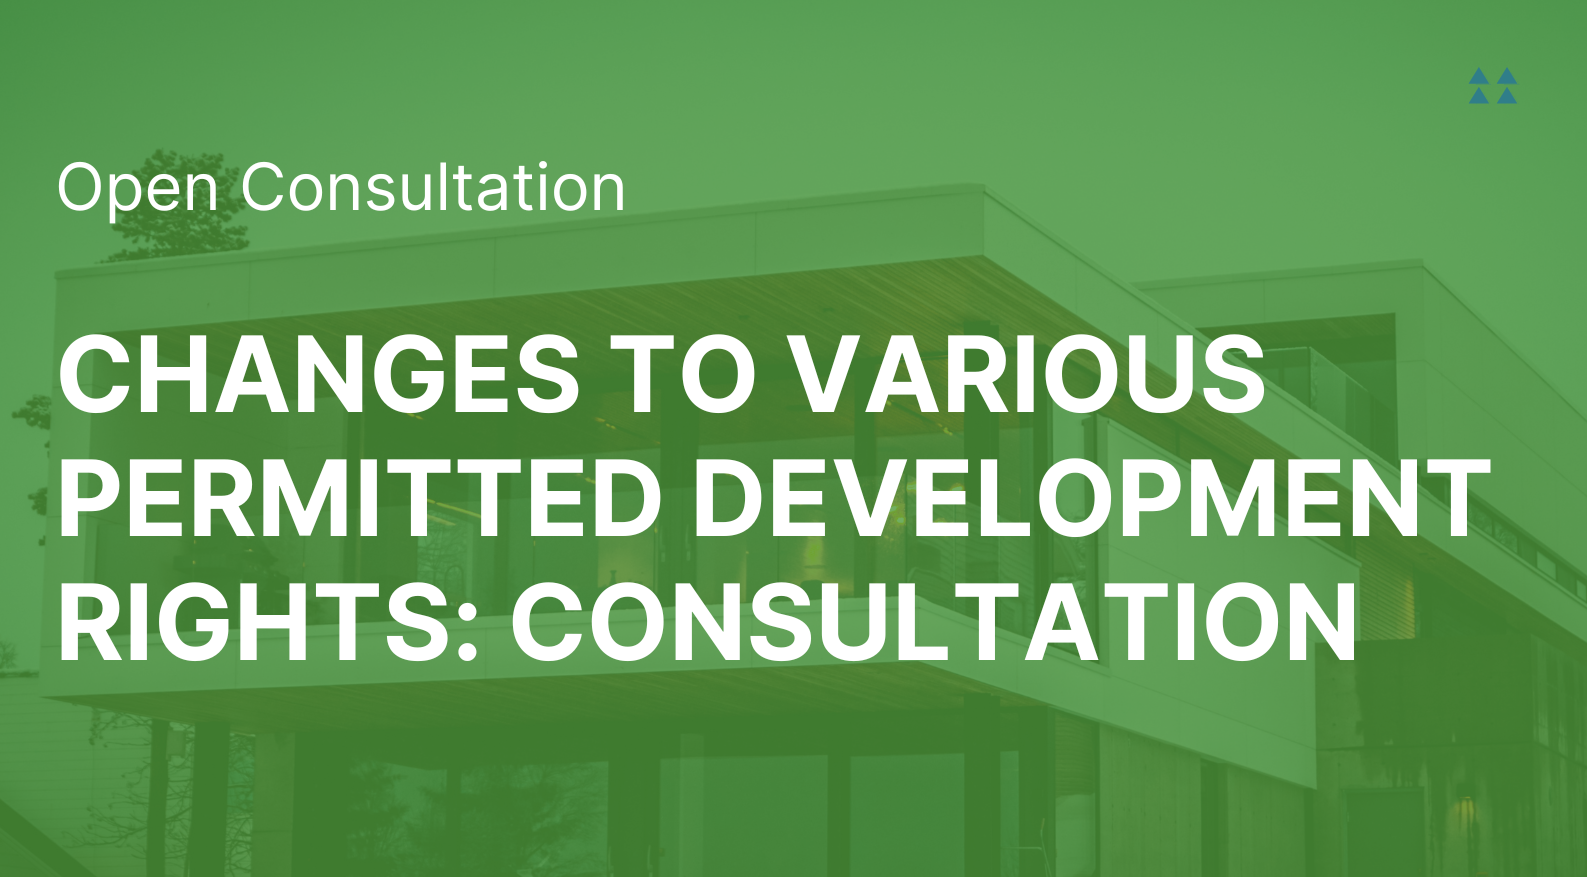 Open consultation Changes to various permitted development rights consultation